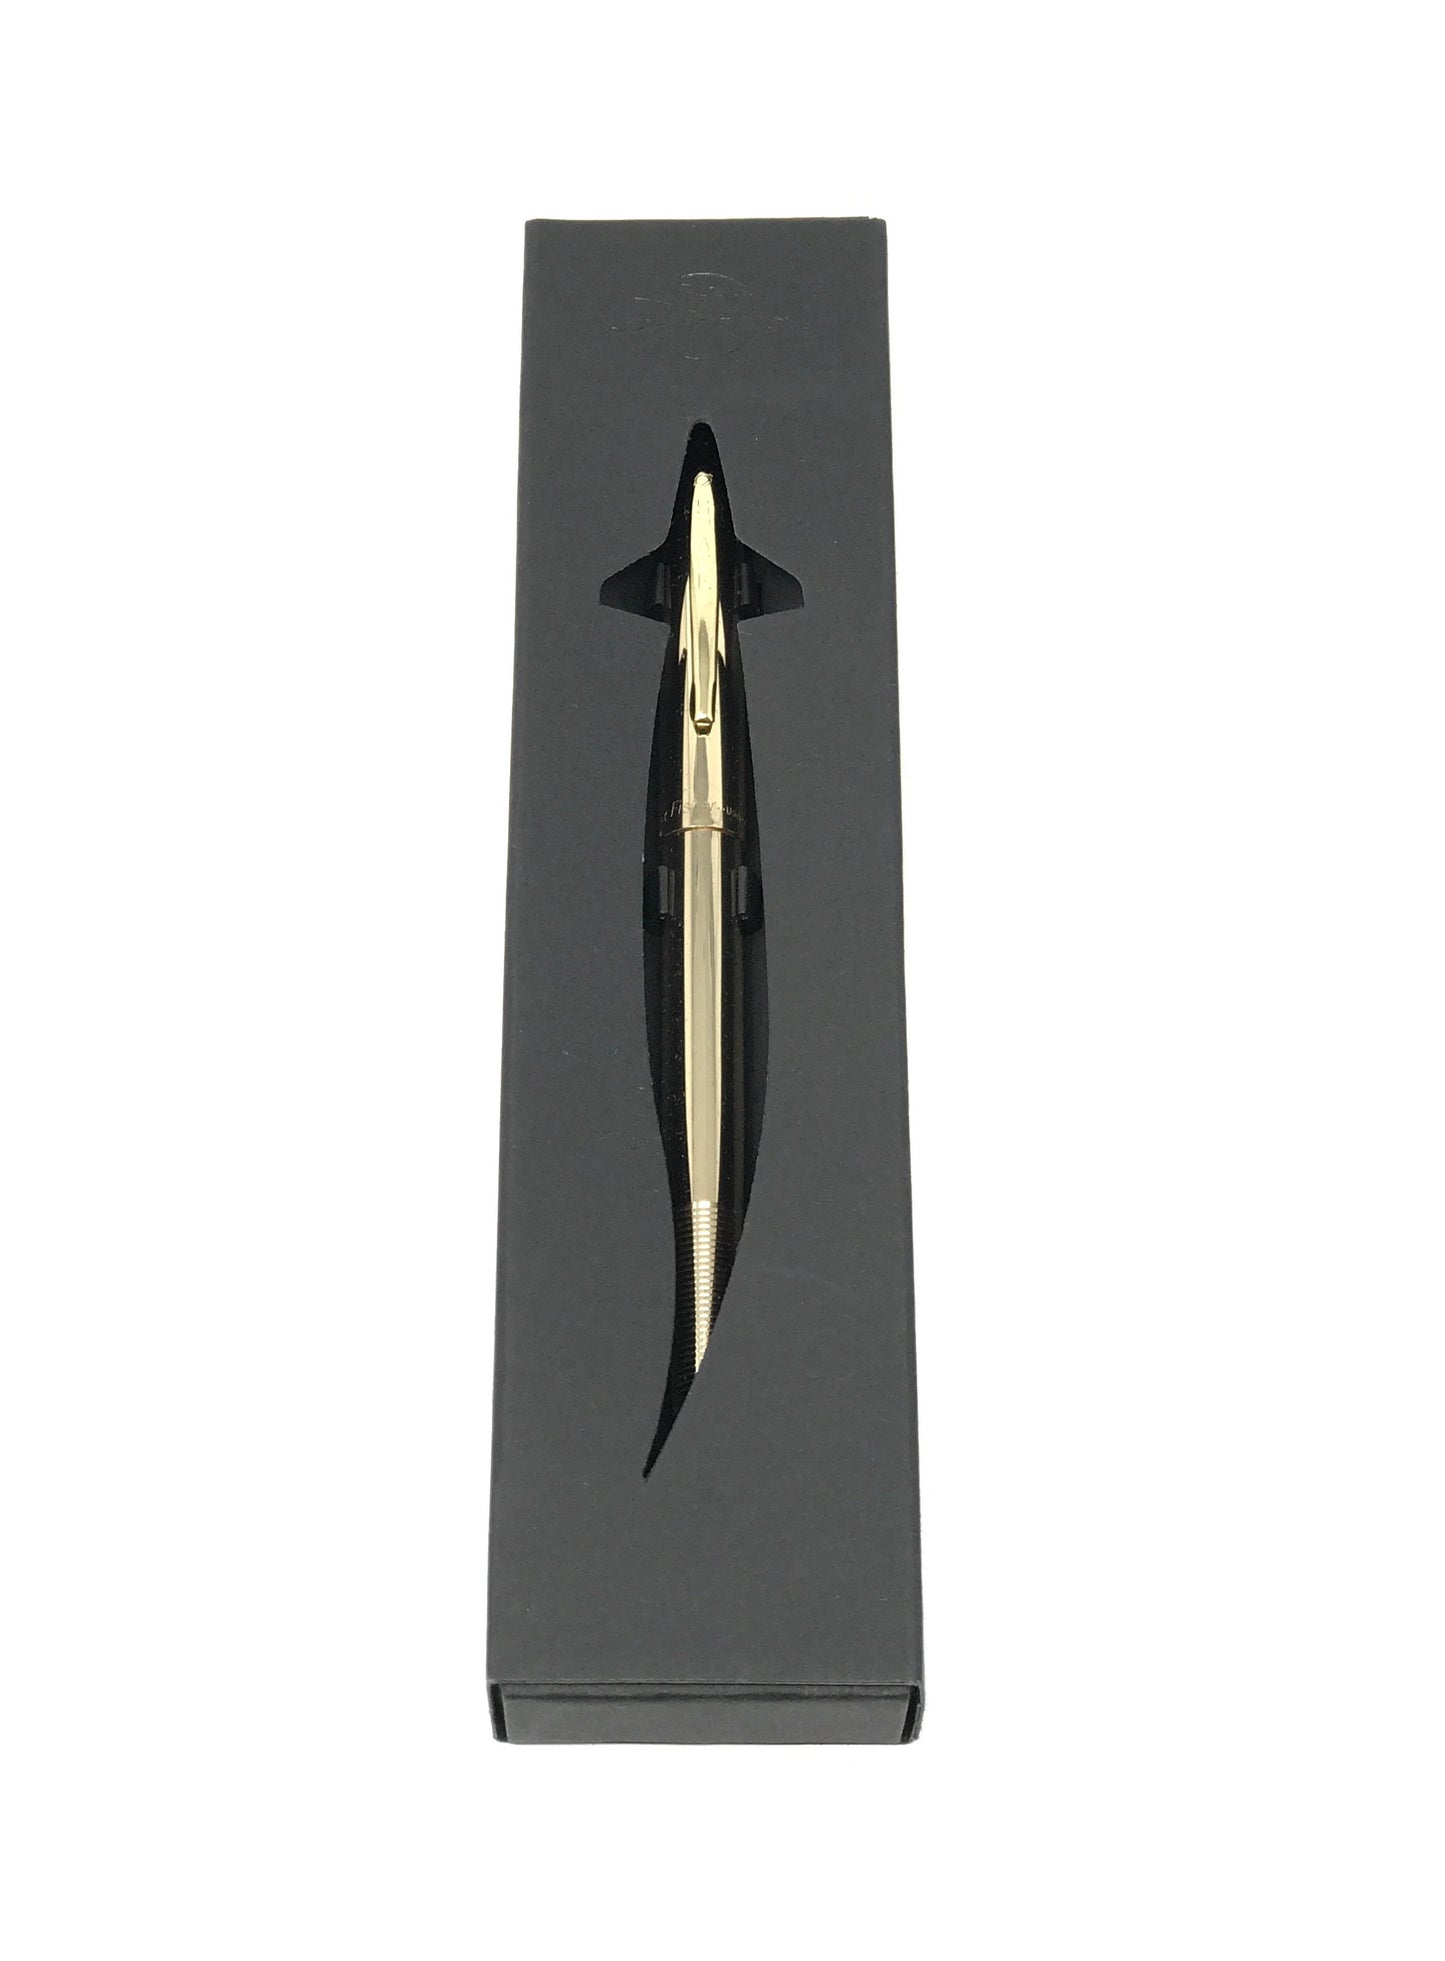 Retractable - Lacquered Brass Space Pen